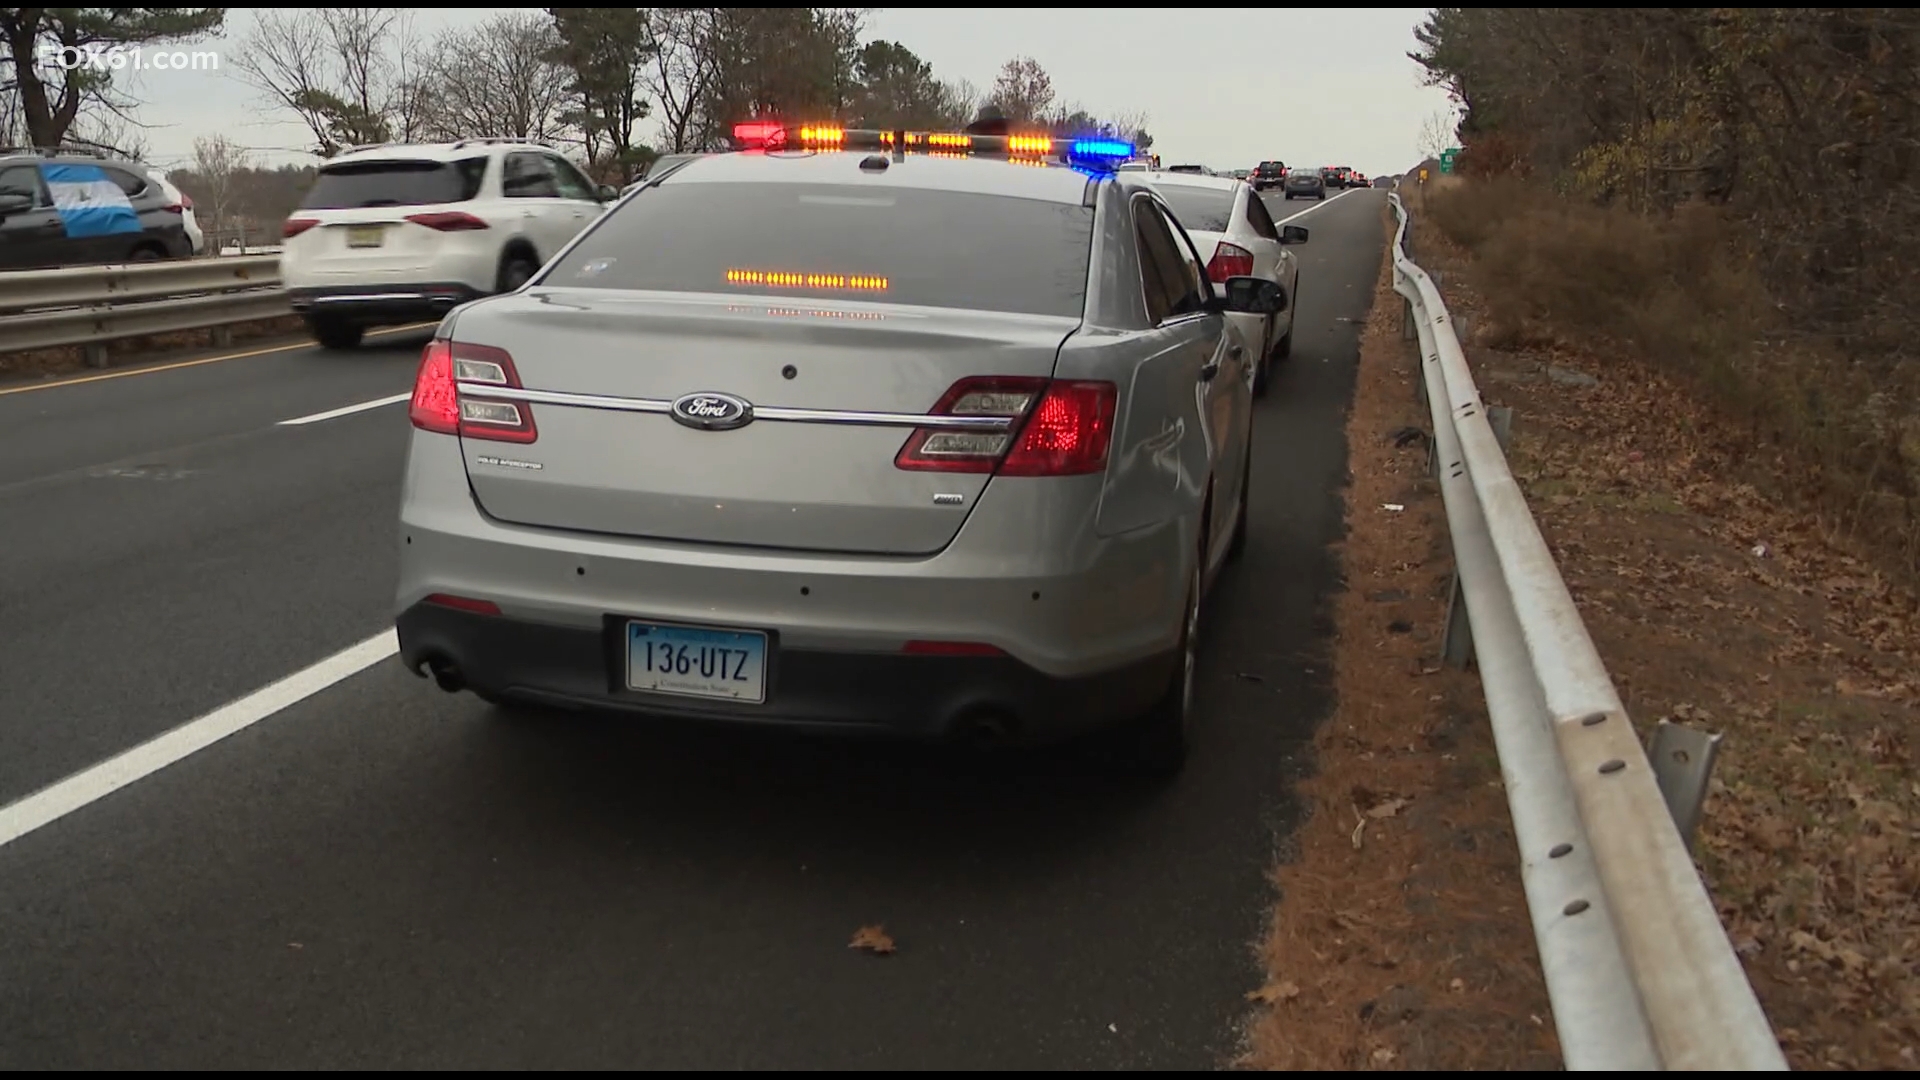 State police recorded nearly 4,000 calls for service, 374 speeding violations, 21 DUI arrests and 244 accidents, including 32 of them with injuries.